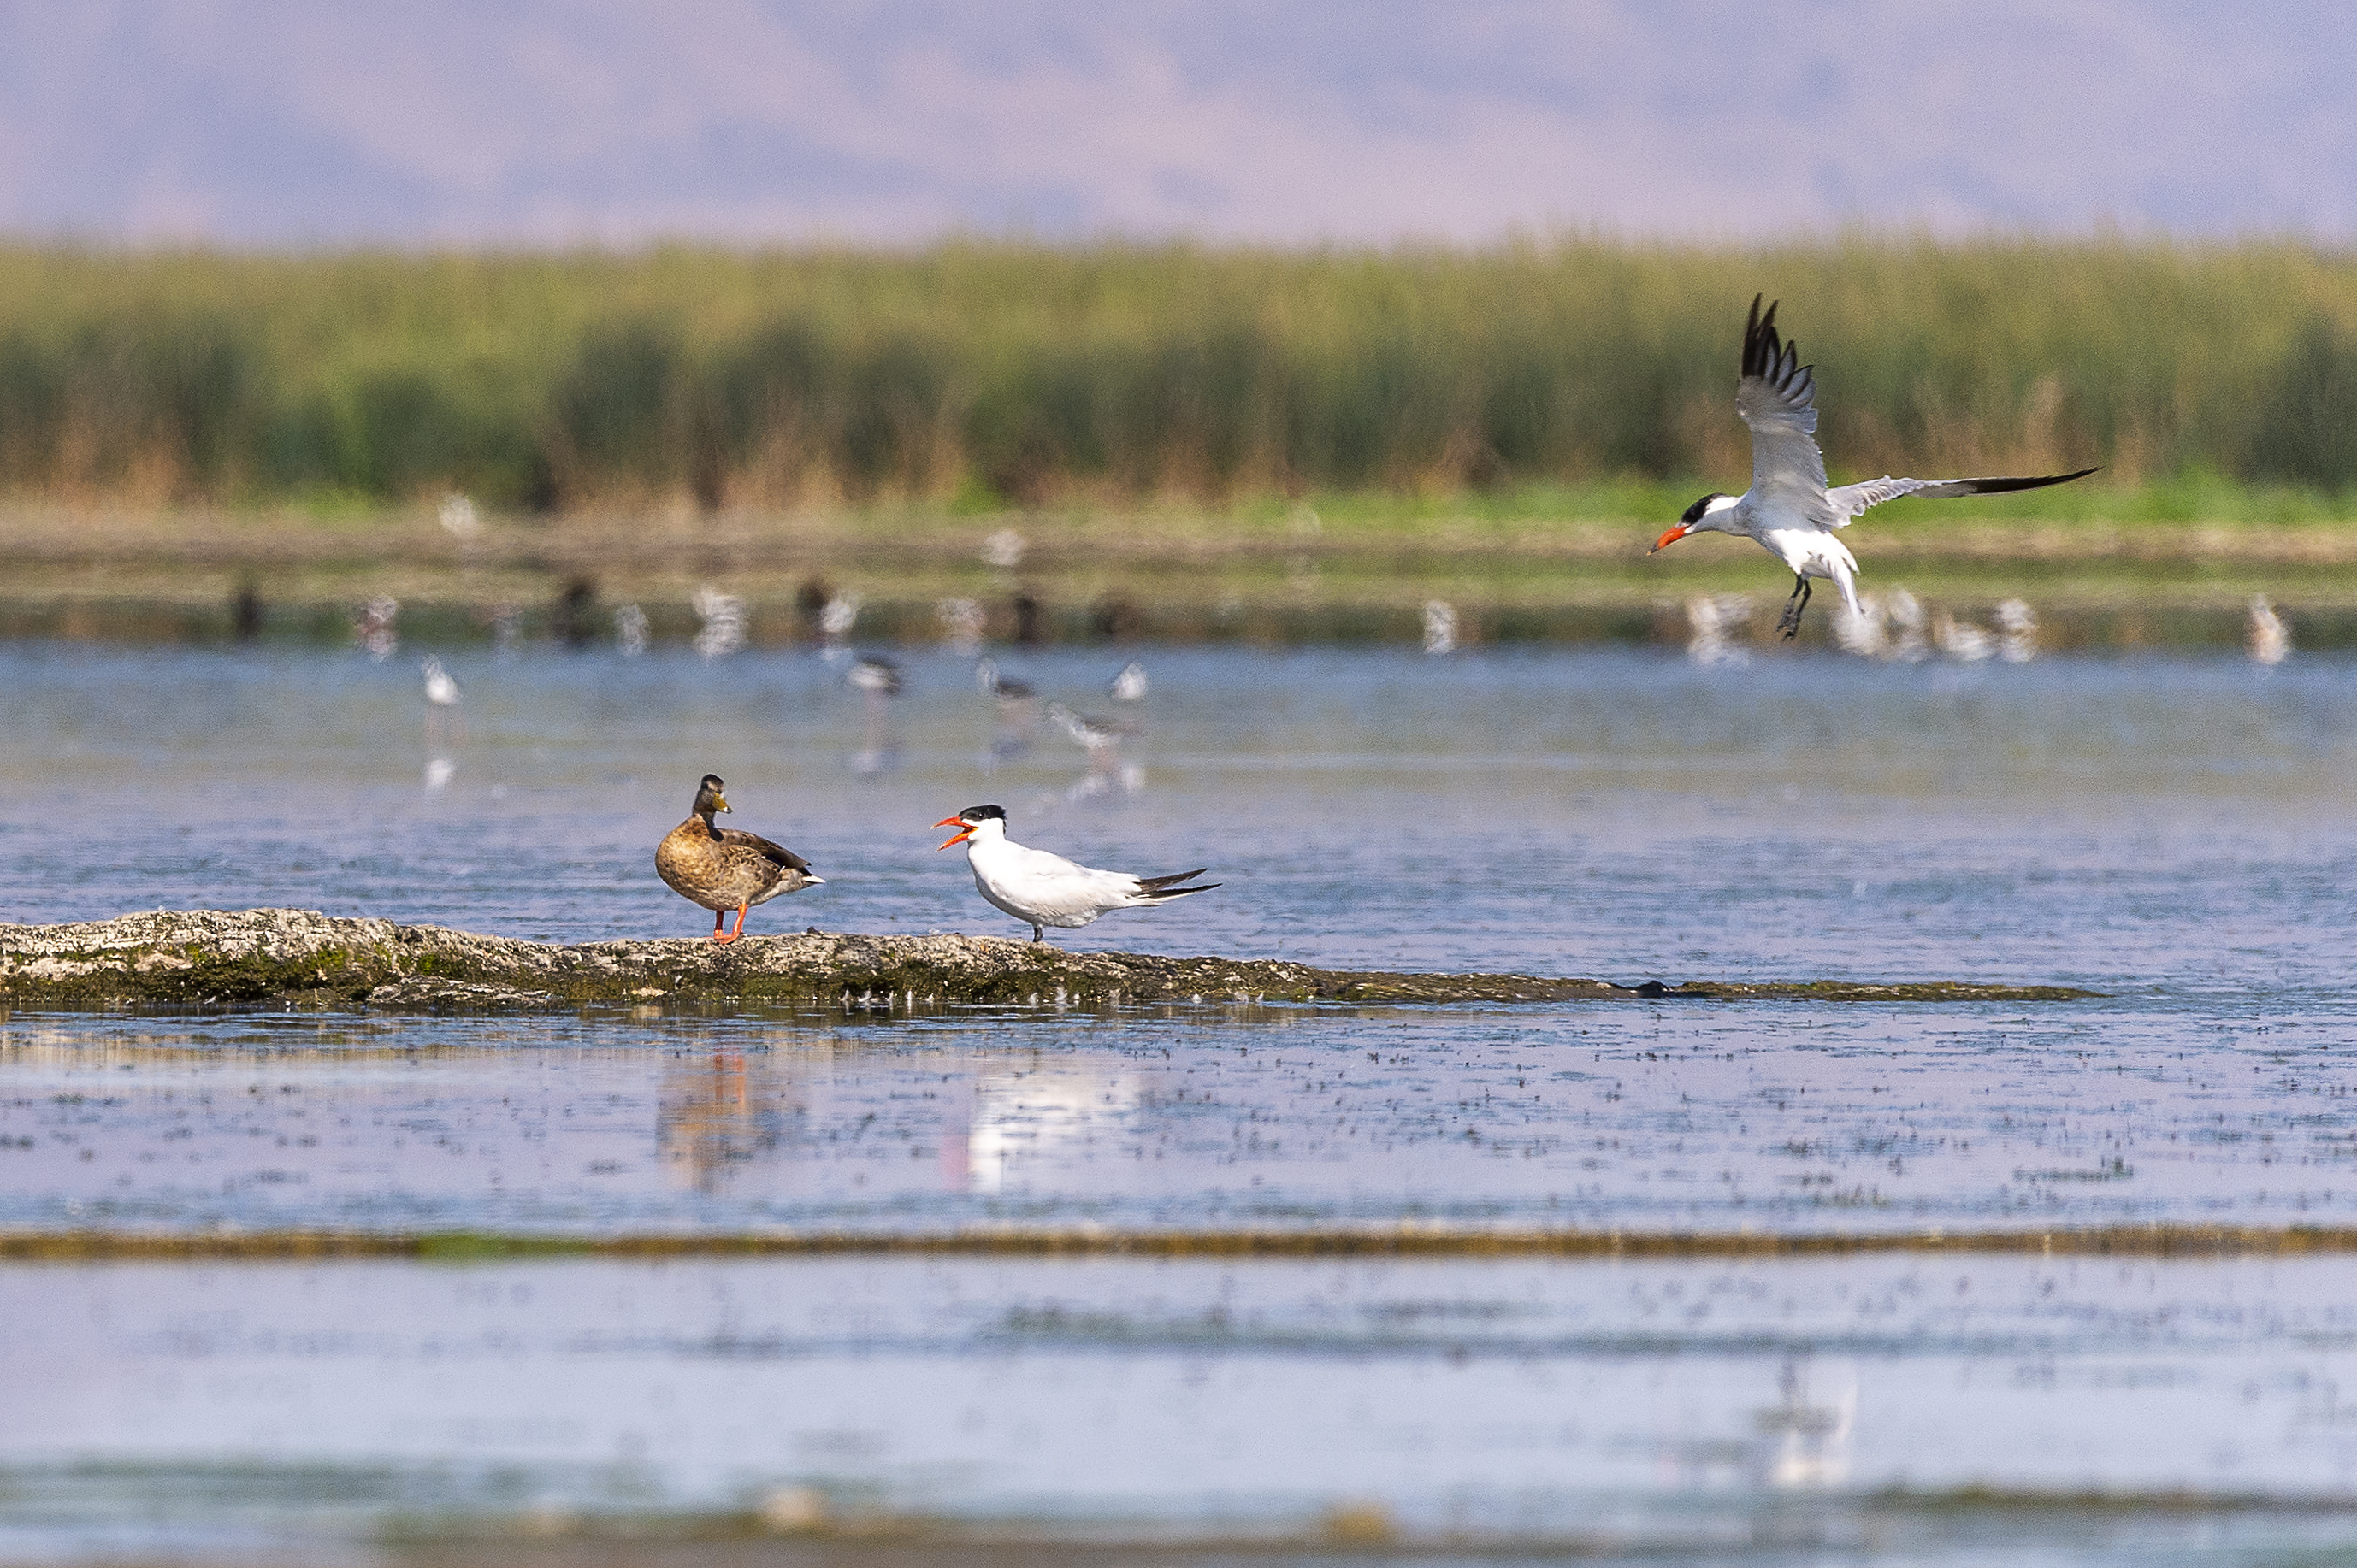 CWA Secures State Funding to Support Water Transfer for Lower Klamath NWR